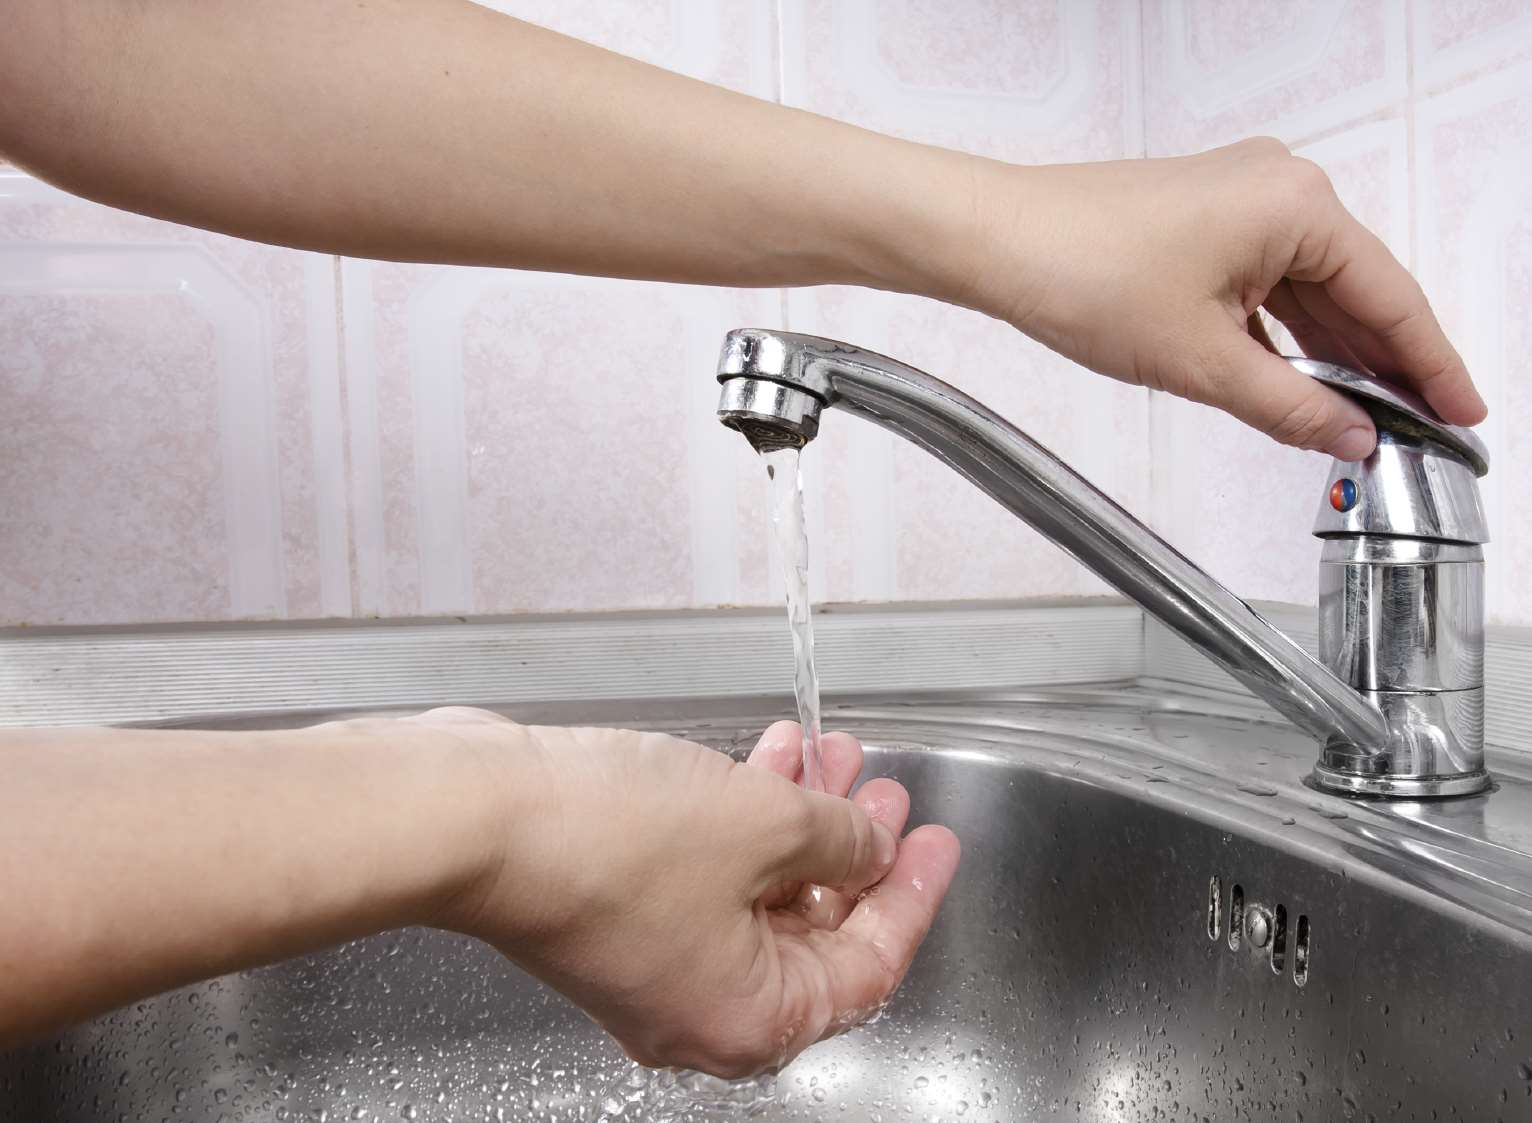 Water pressure has decreased while maintenance work is taking place. Stock picture